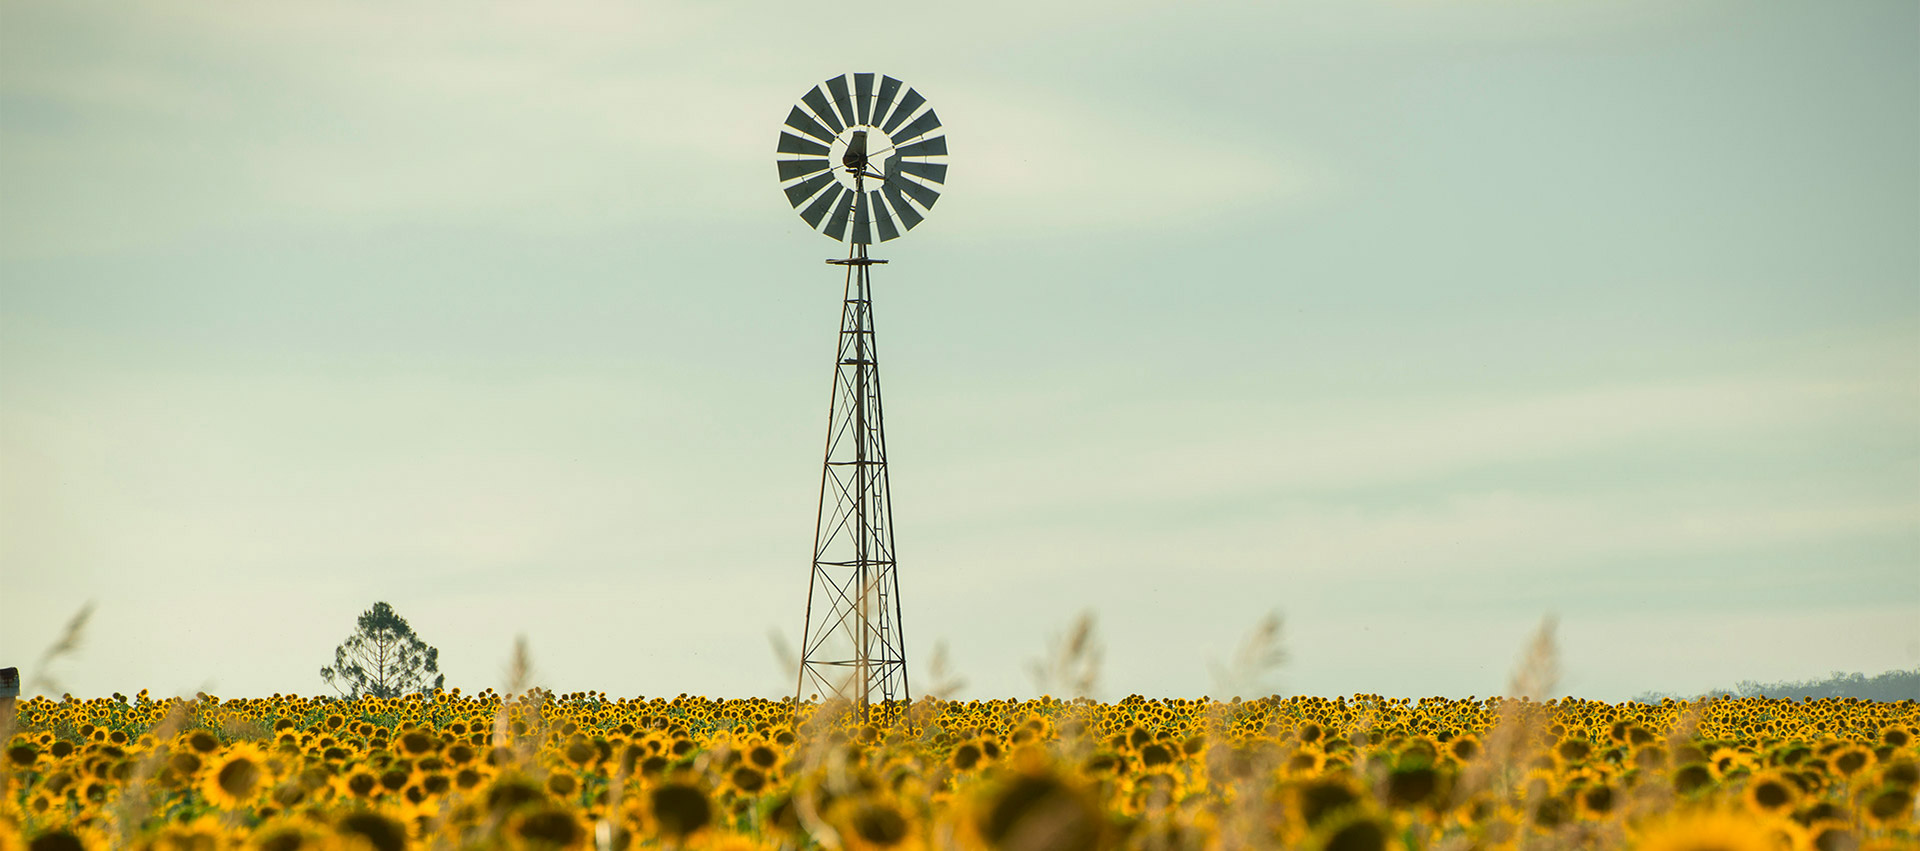 Sunflowers amongst a field next to a windmill in the afternoon in Nobby, Toowoomba Region, Queensland.